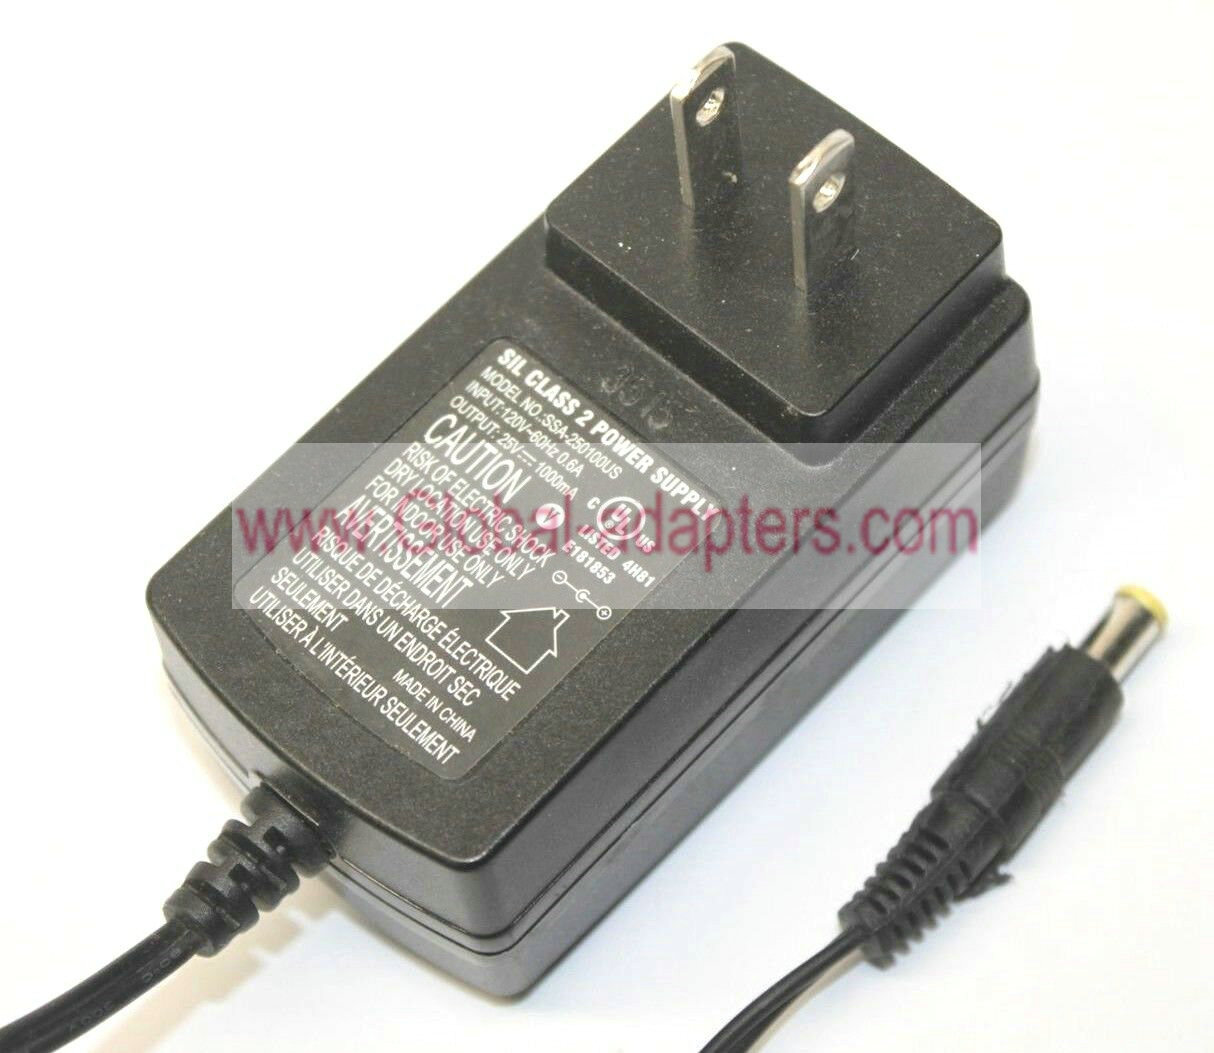 Brand New SIL SSA-250100US Class 2 Power Supply 25V 1000mA Adapter Transformer Charger - Click Image to Close